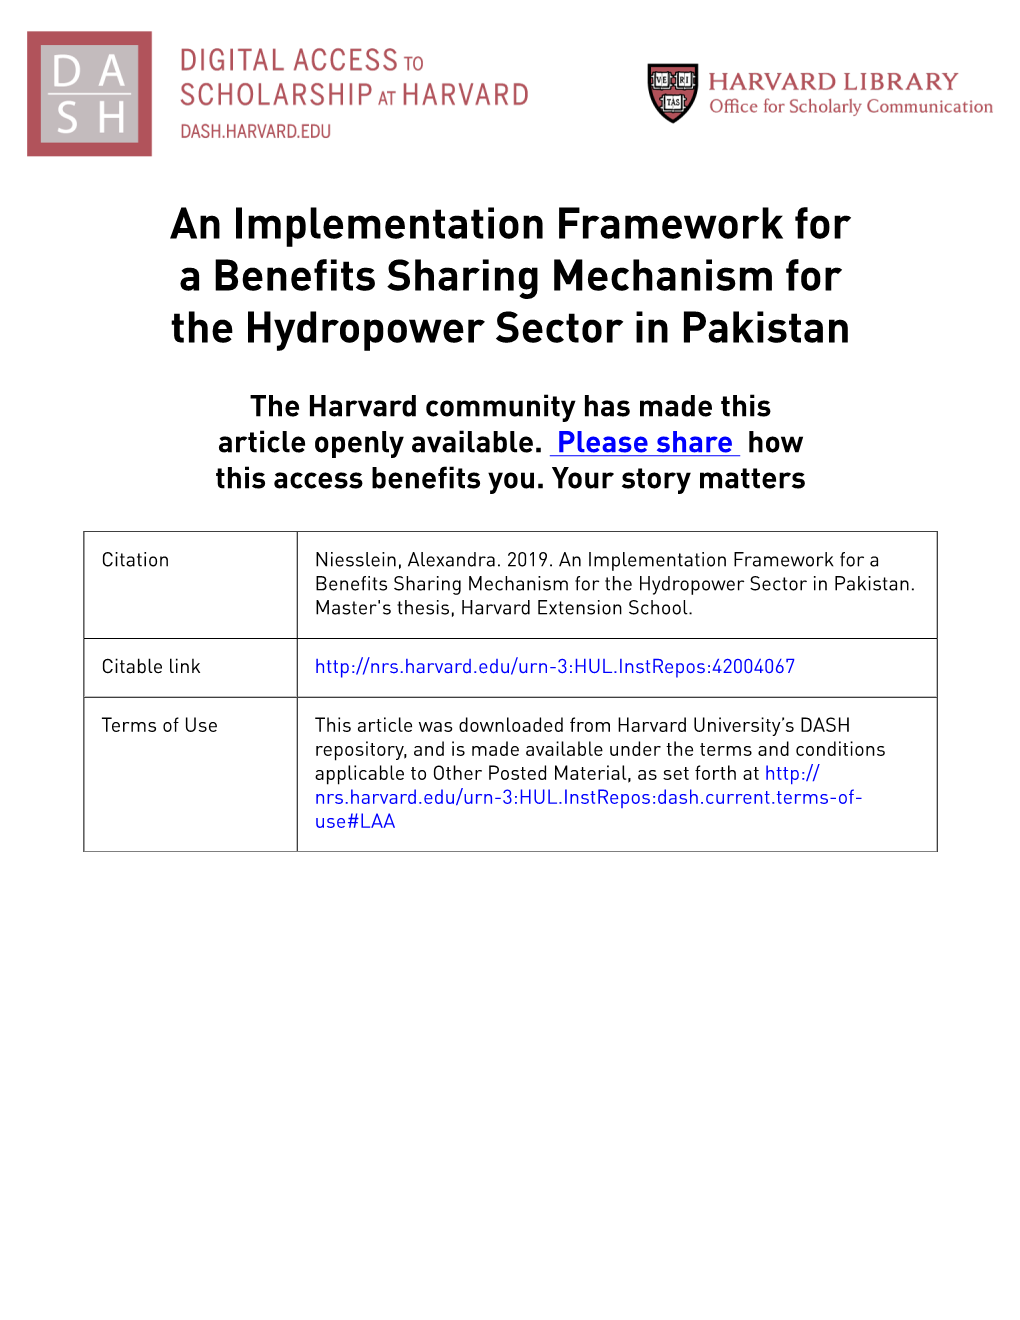 An Implementation Framework for a Benefits Sharing Mechanism for the Hydropower Sector in Pakistan